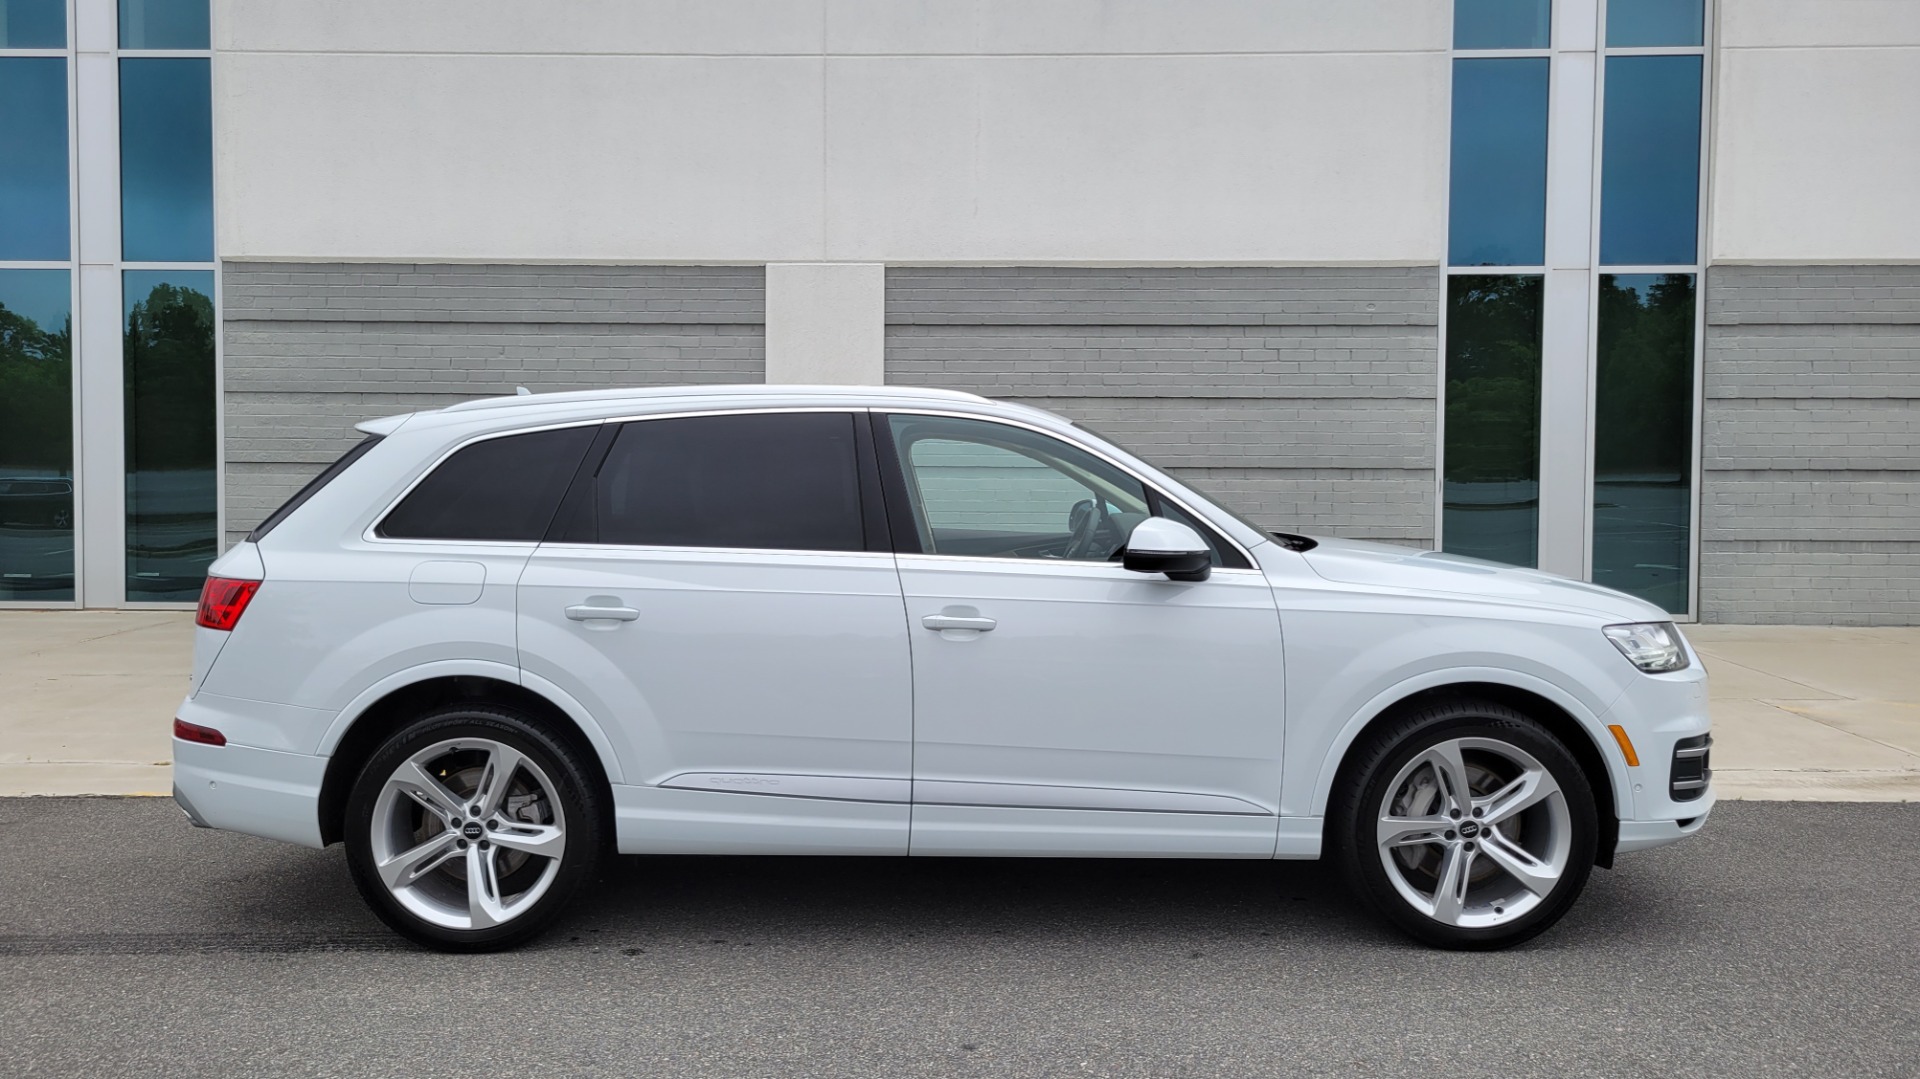 Used 2019 Audi Q7 PRESTIGE / CONV PKG / BOSE / HUD / CLD WTHR / TOWING / REARVIEW for sale $50,295 at Formula Imports in Charlotte NC 28227 10